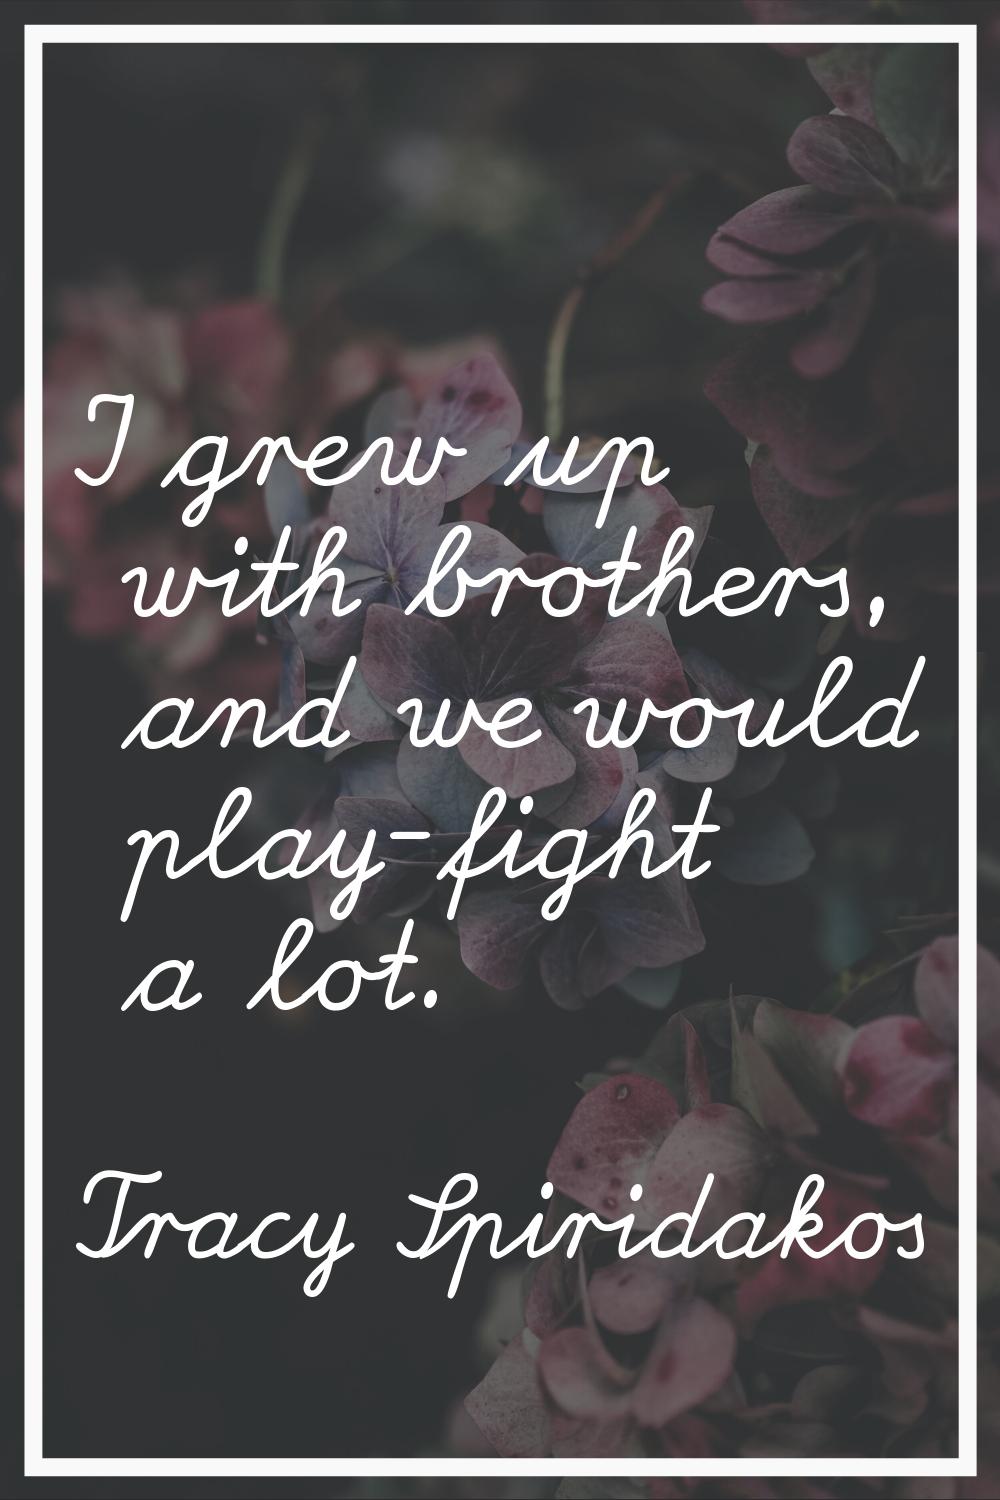 I grew up with brothers, and we would play-fight a lot.